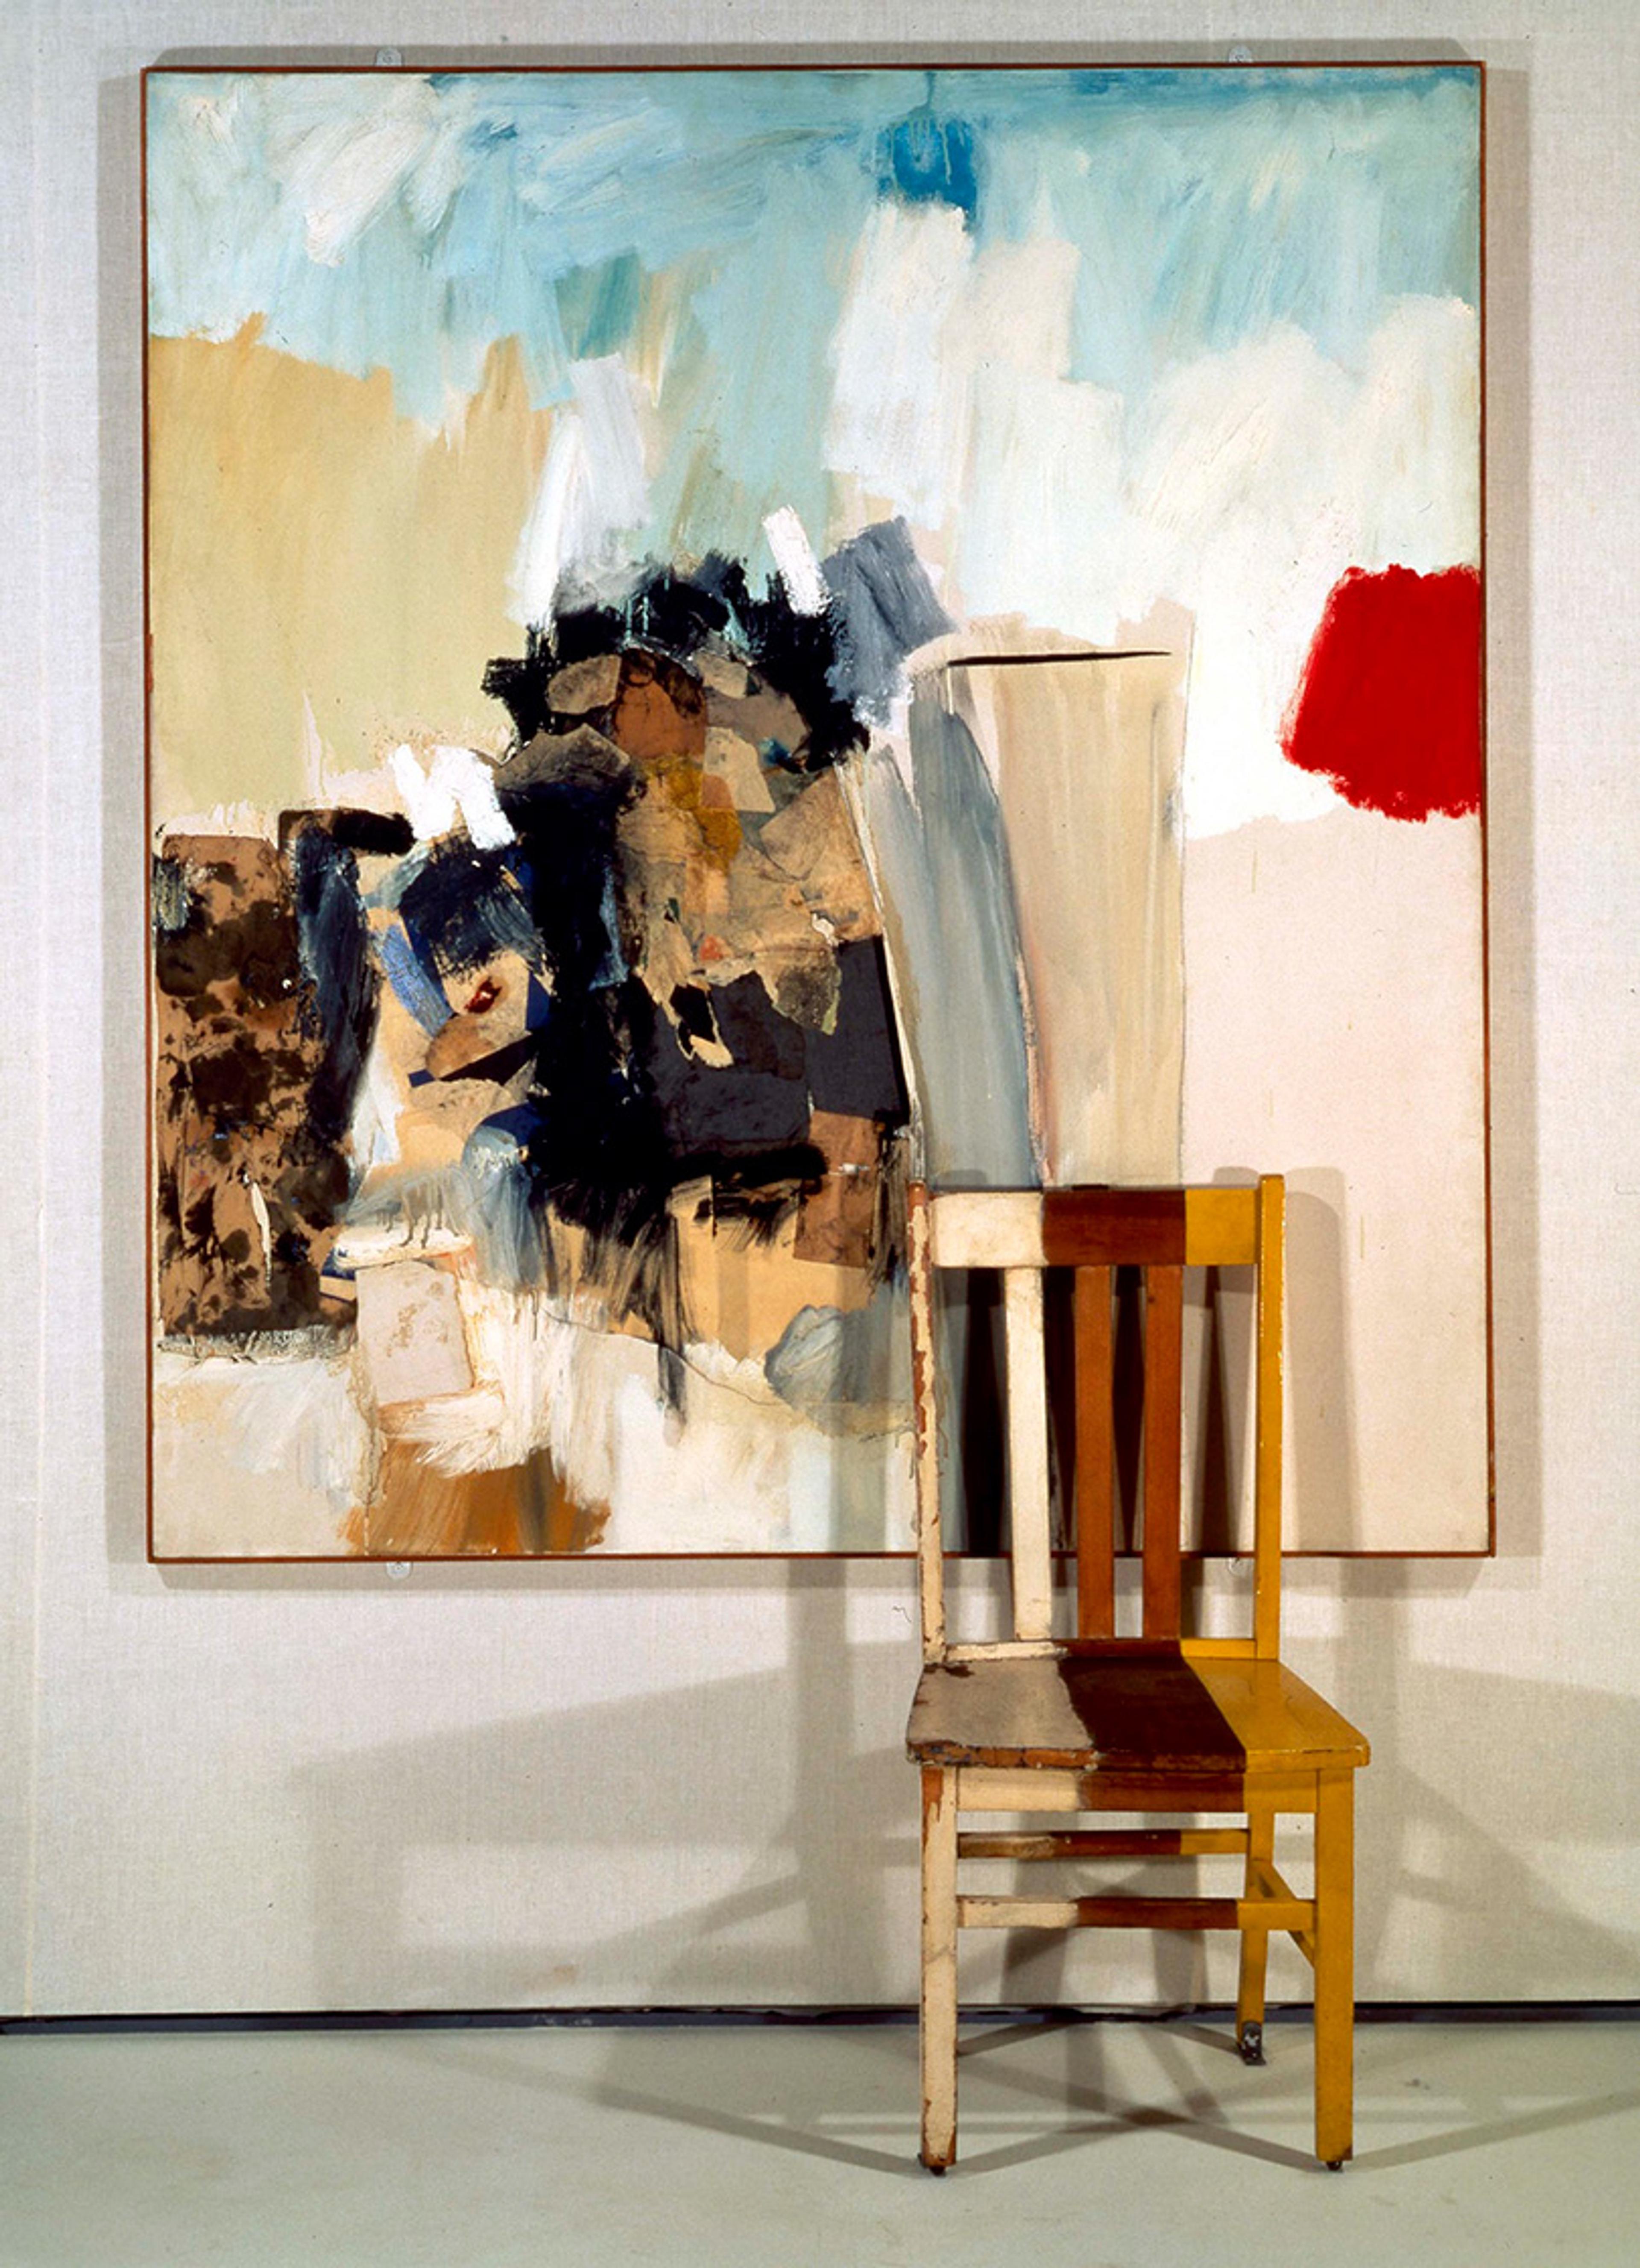 An abstract painting with blue, white, black, and beige colours is displayed on a wall. A worn, multicoloured wooden chair is placed in front of the painting. The painting and chair overlap, creating a visually interesting contrast between the 2D art and the 3D object.